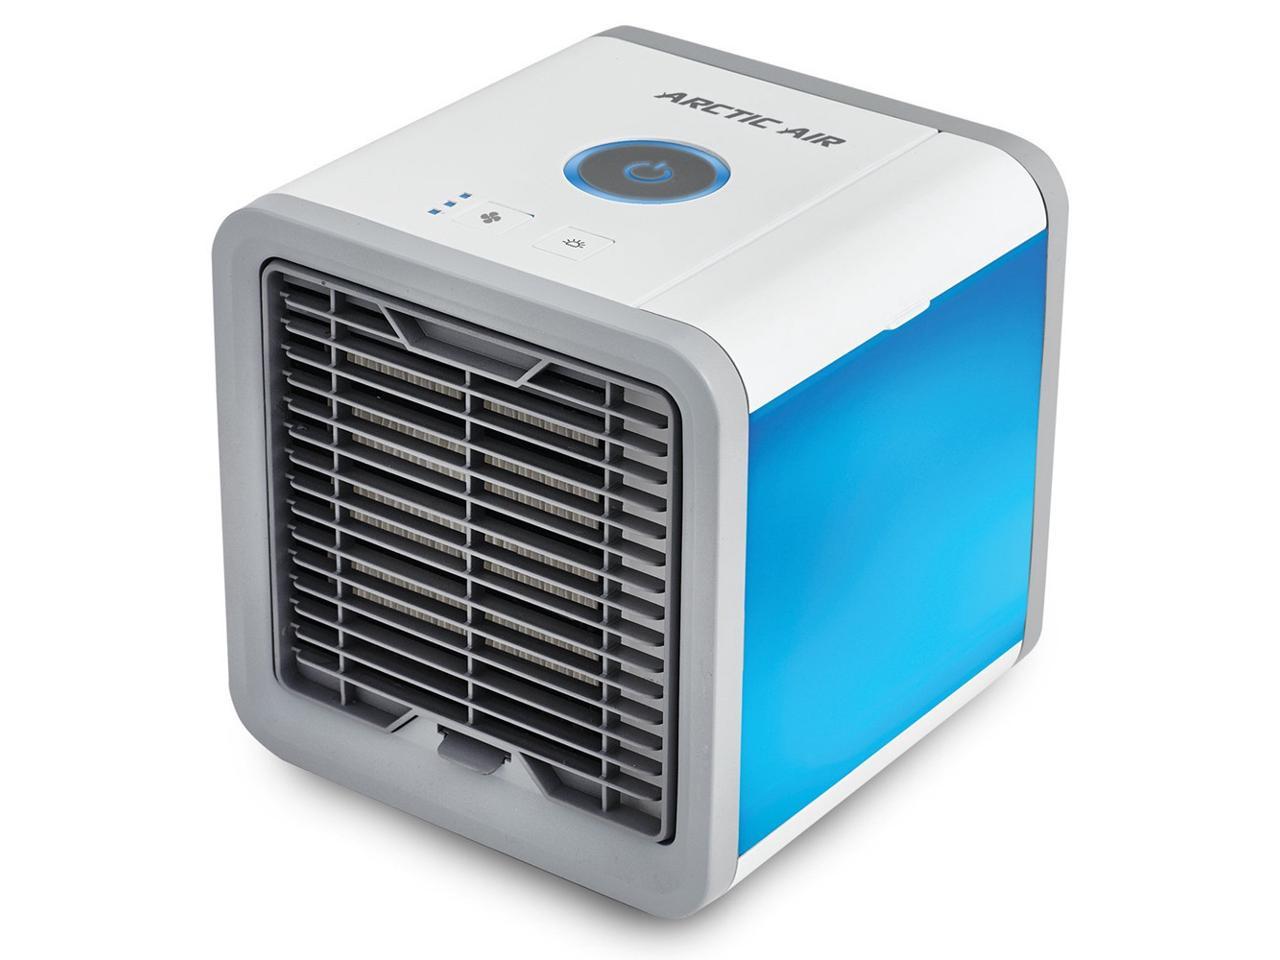 EC2WORLD Cooler Small Air Conditioning Appliances Mini Fans